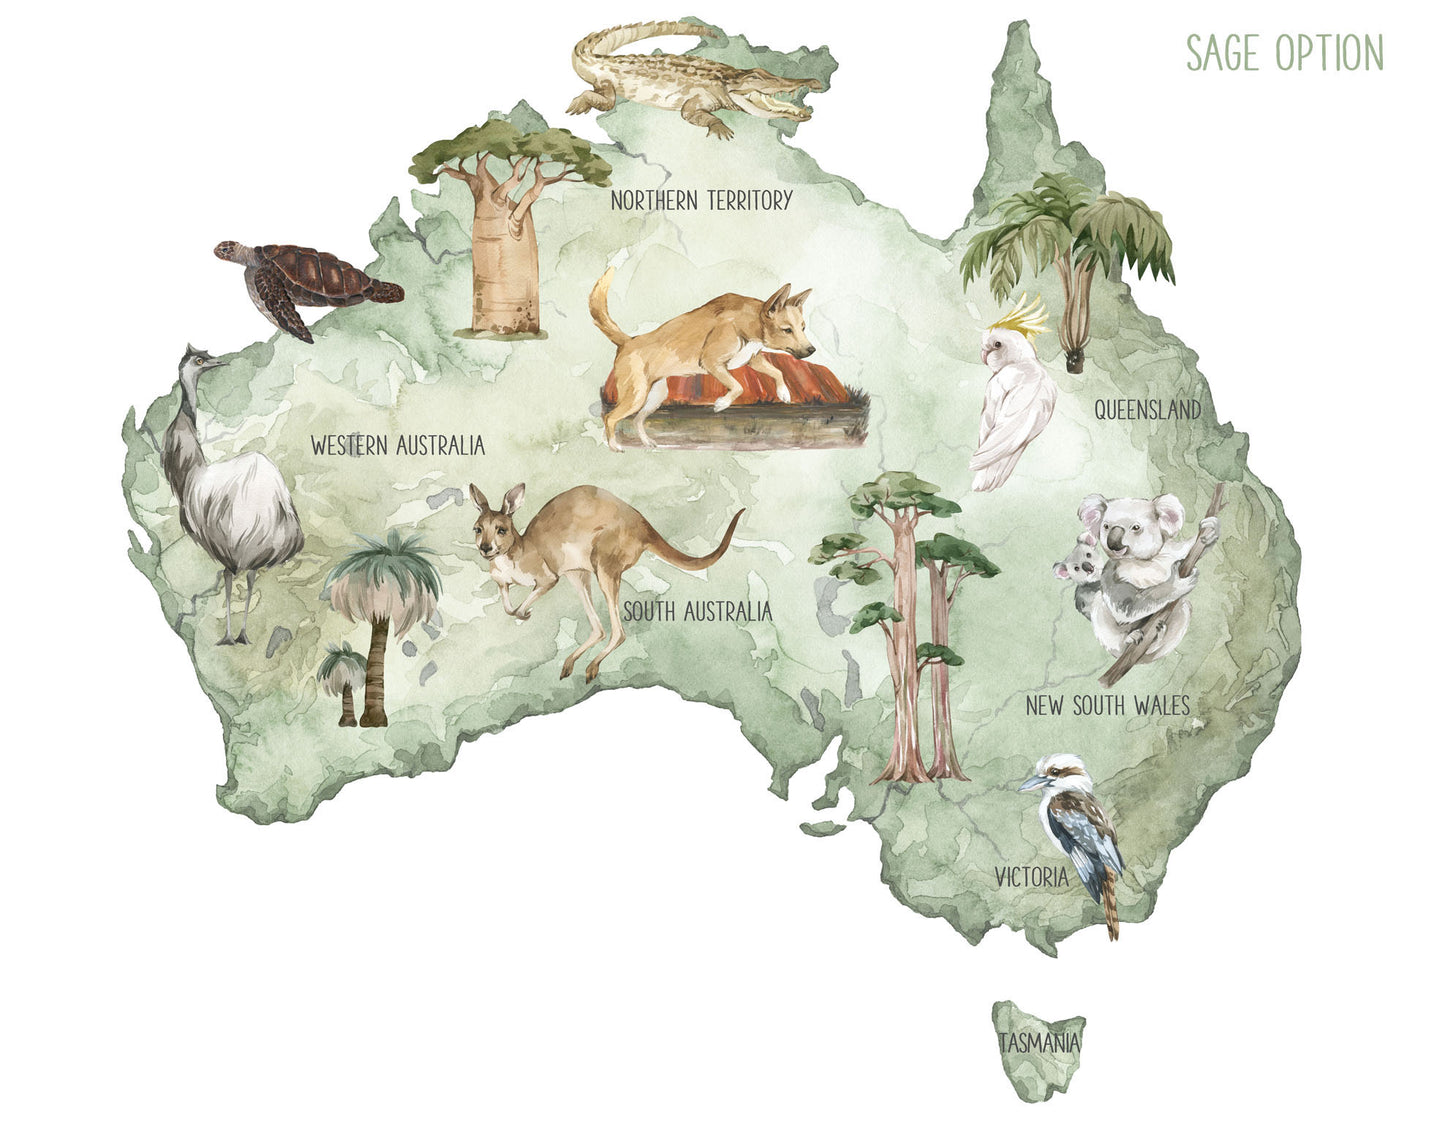 Map of Australia Decal - Wall Decals - Fable and Fawn 